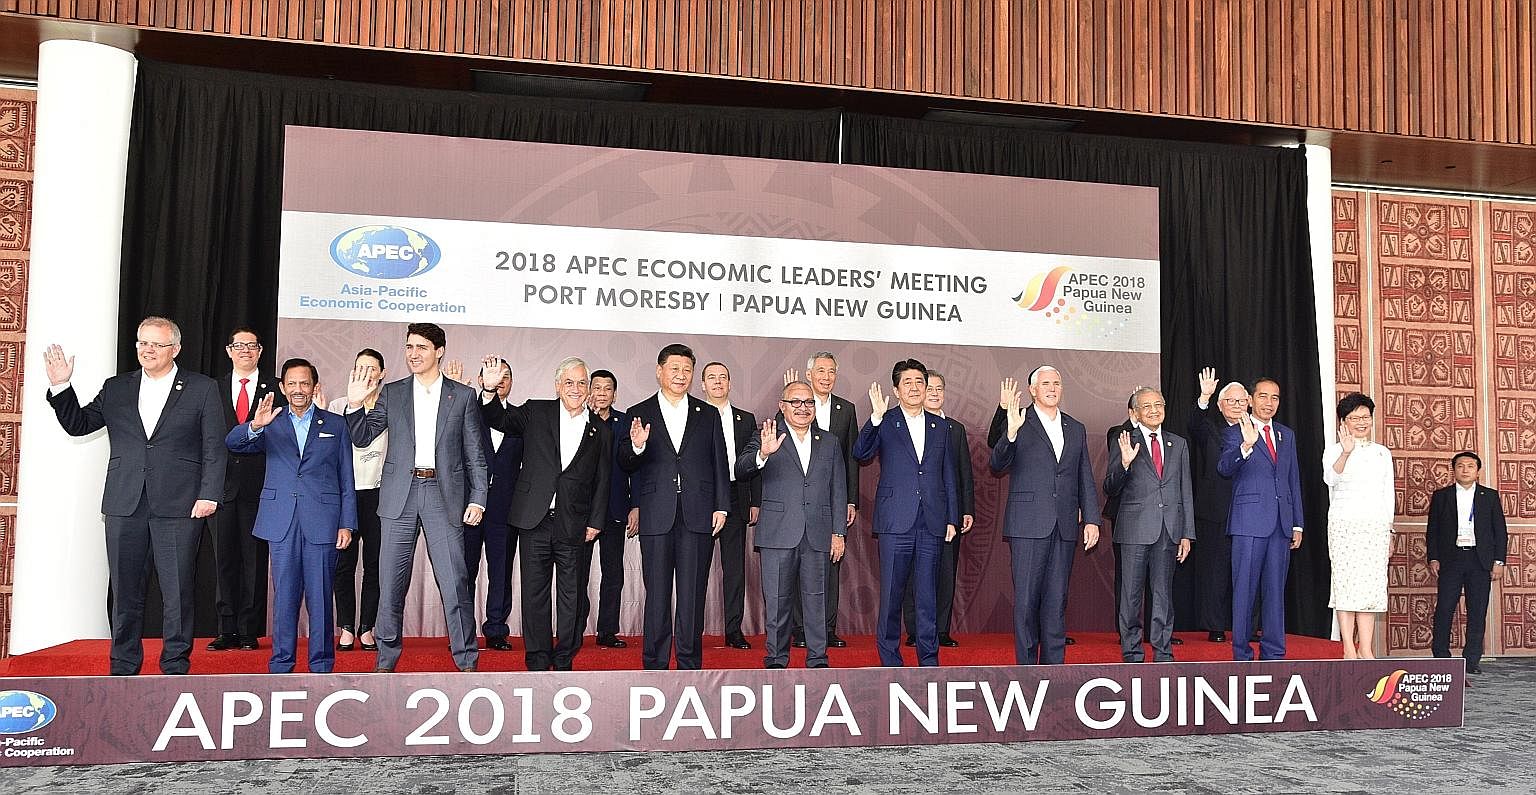 Prime Minister Lee Hsien Loong listening to a presentation at the Apec summit in Port Moresby yesterday. He called on fellow leaders to press on with efforts to form a Free Trade Area of the Asia-Pacific.